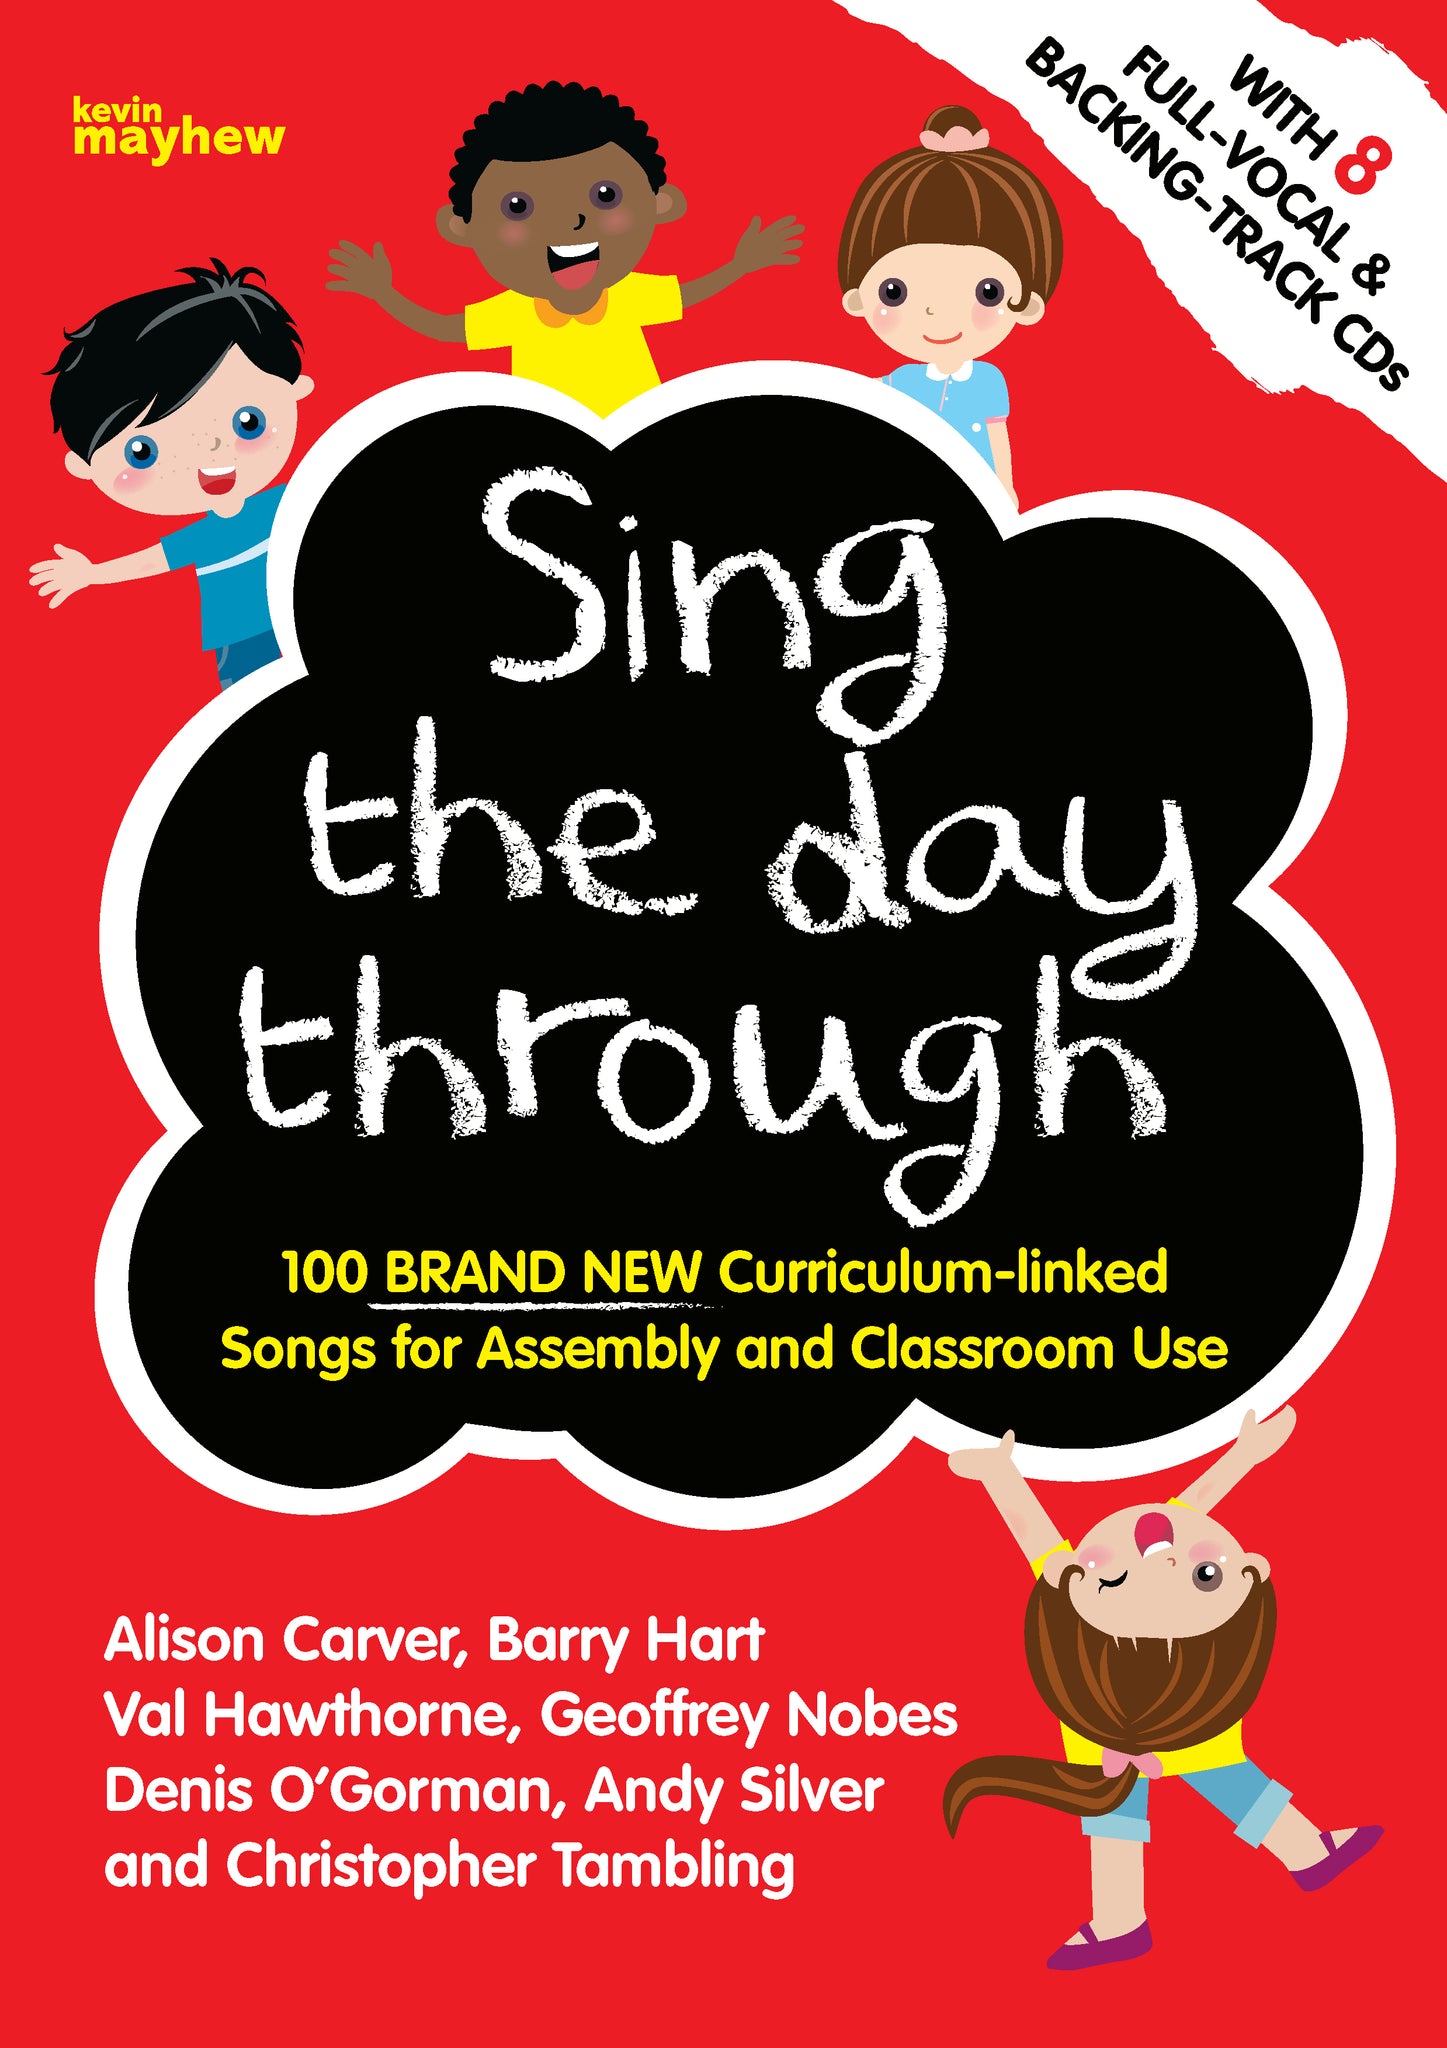 Sing the Day Through - Full Music Book Only